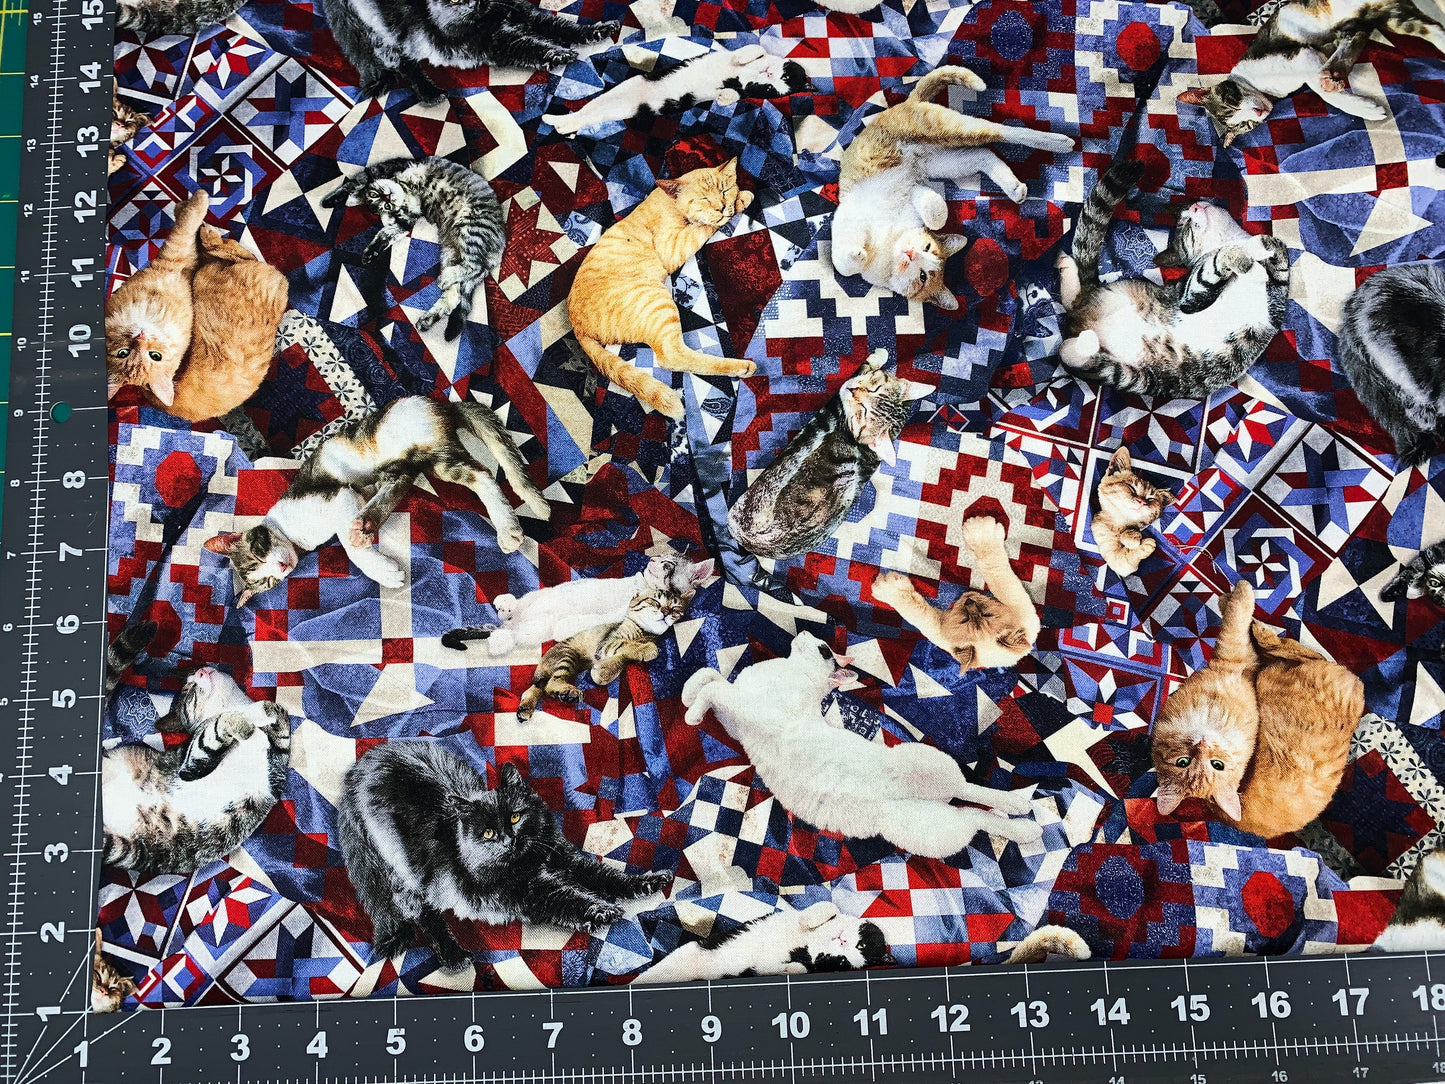 Cats on quilt fabric CD1484 cat cotton fabric